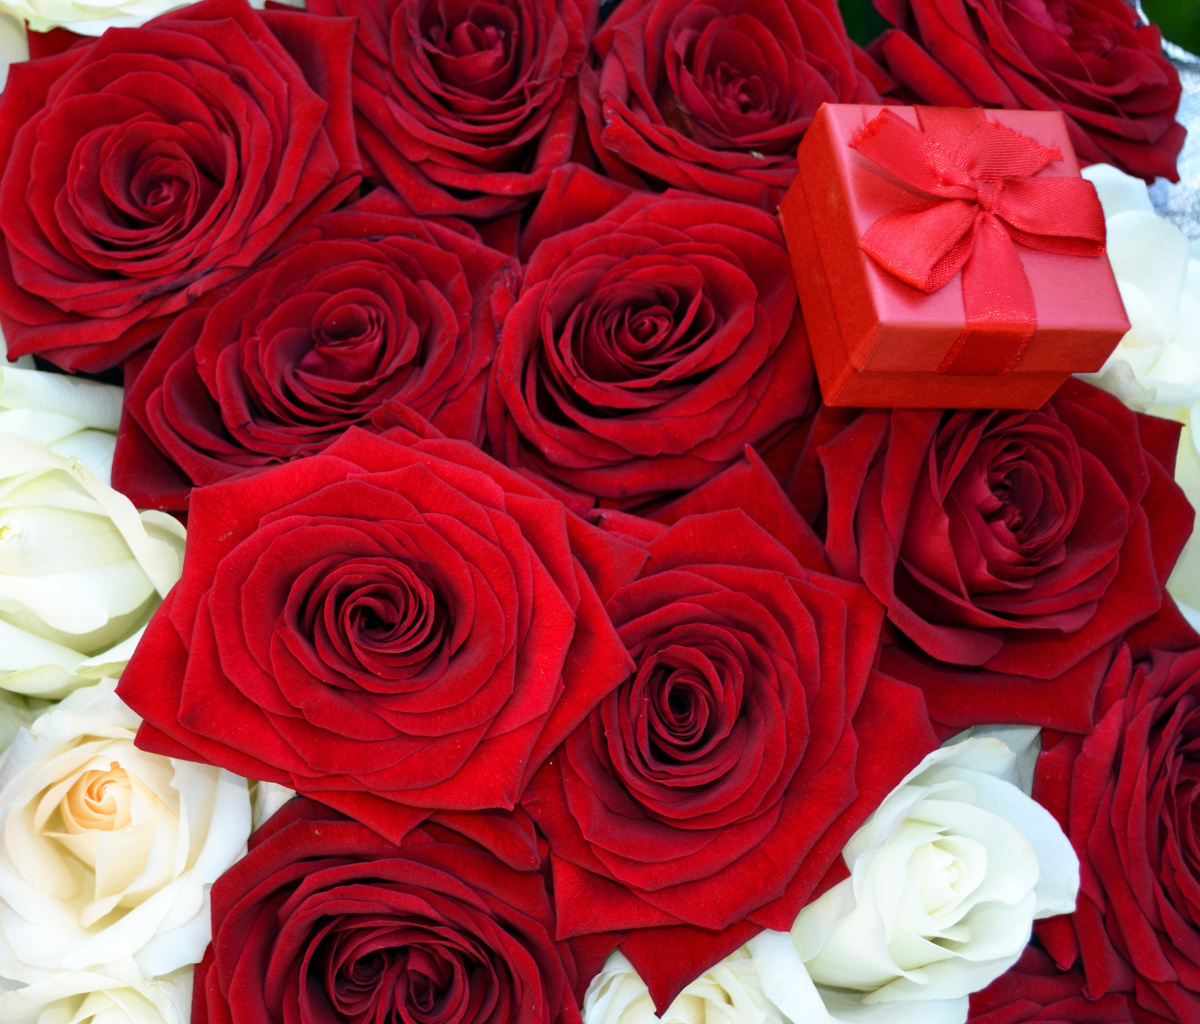 Das Roses for Propose Wallpaper 1200x1024